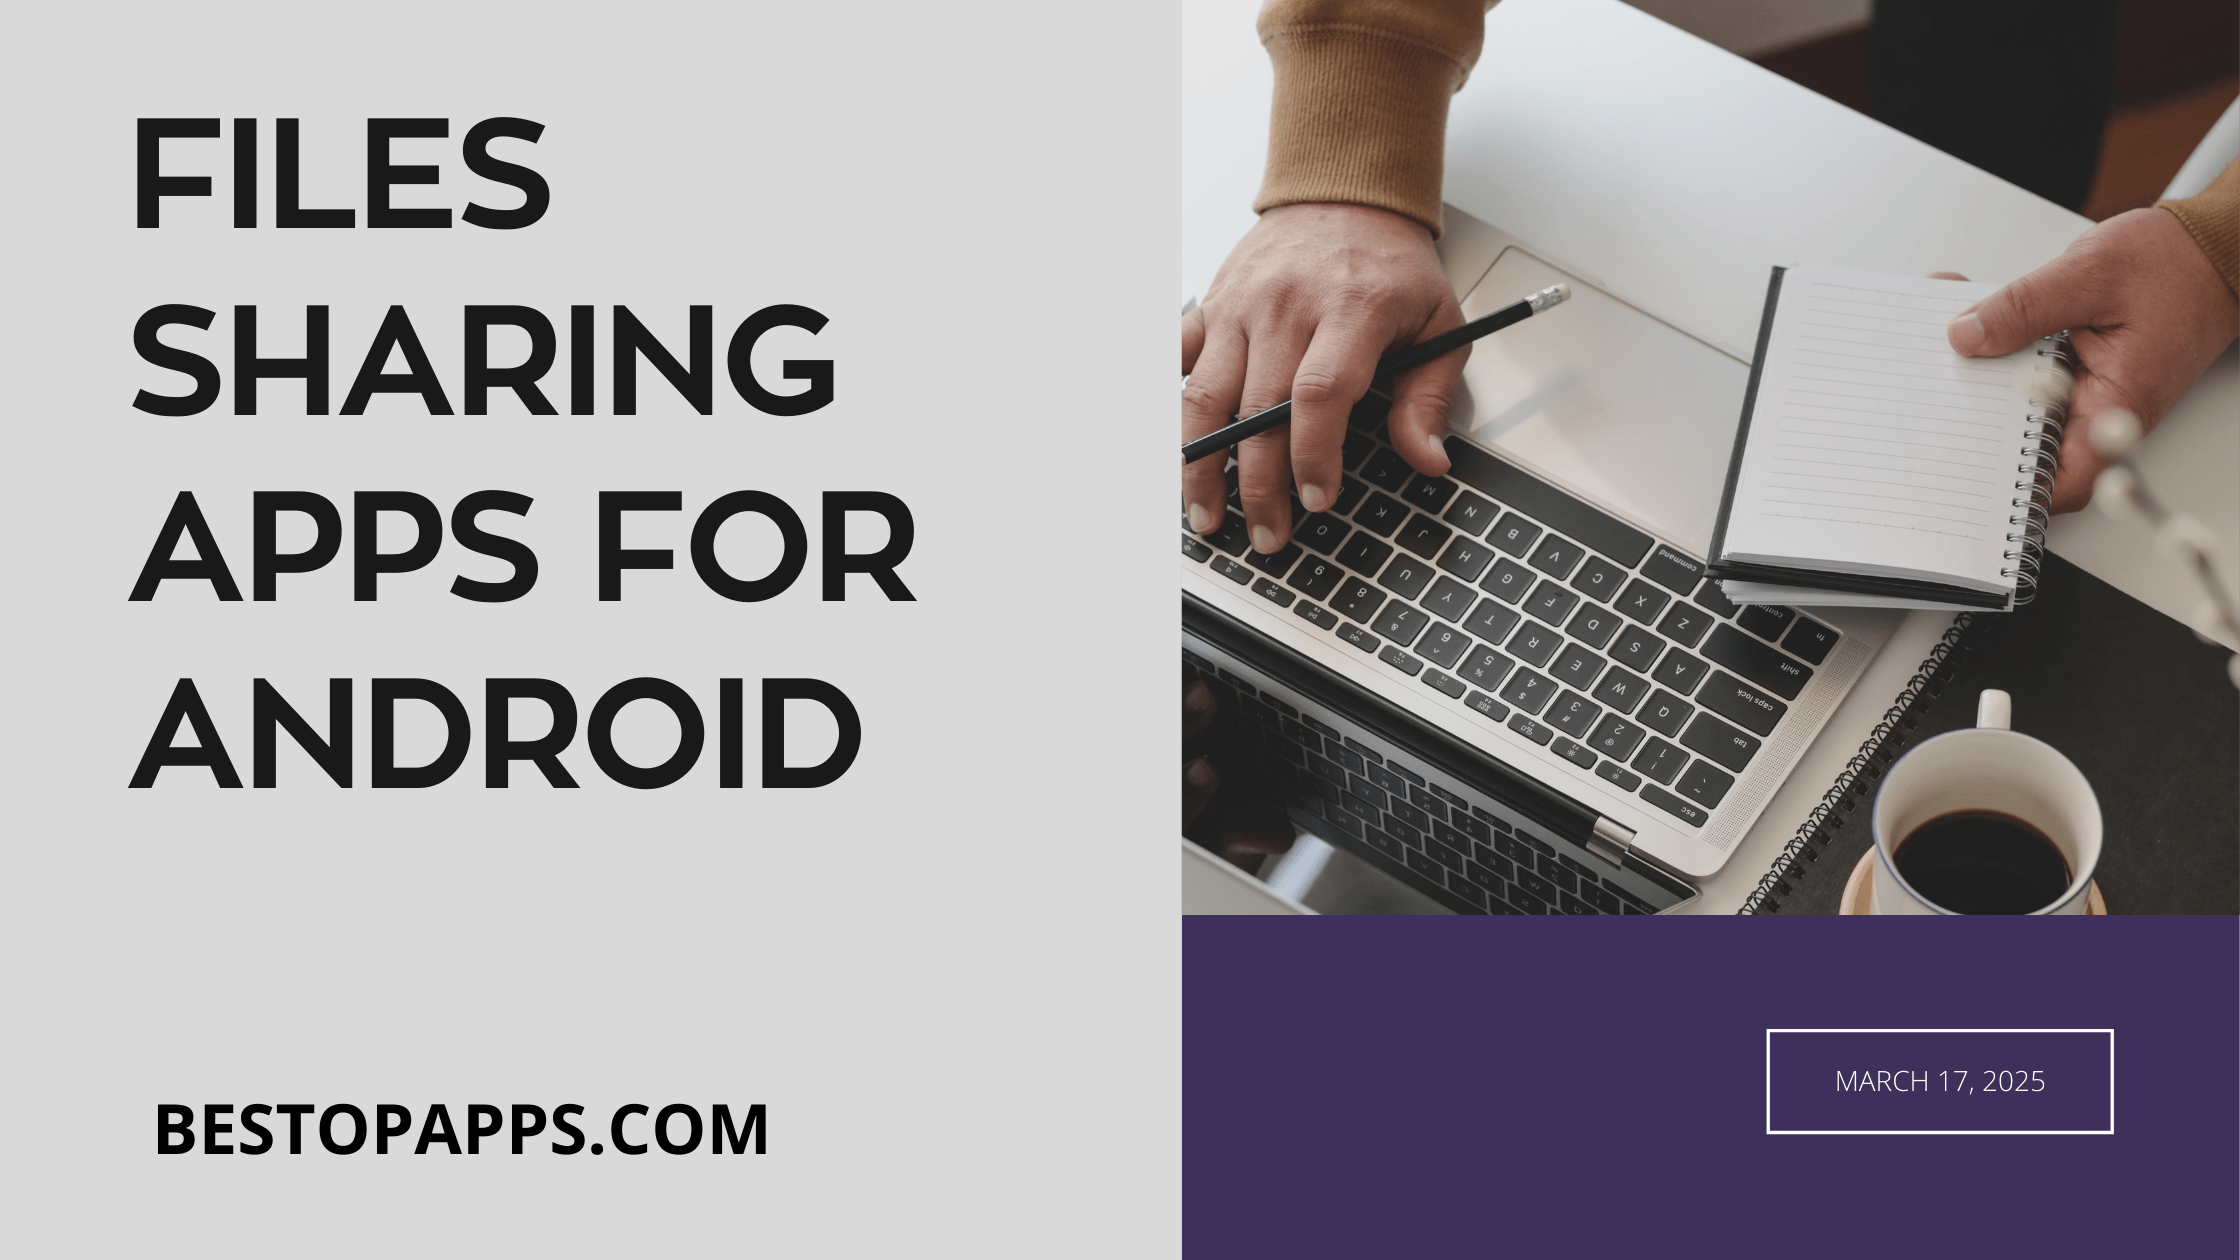 Files-Sharing-Apps-For-Android